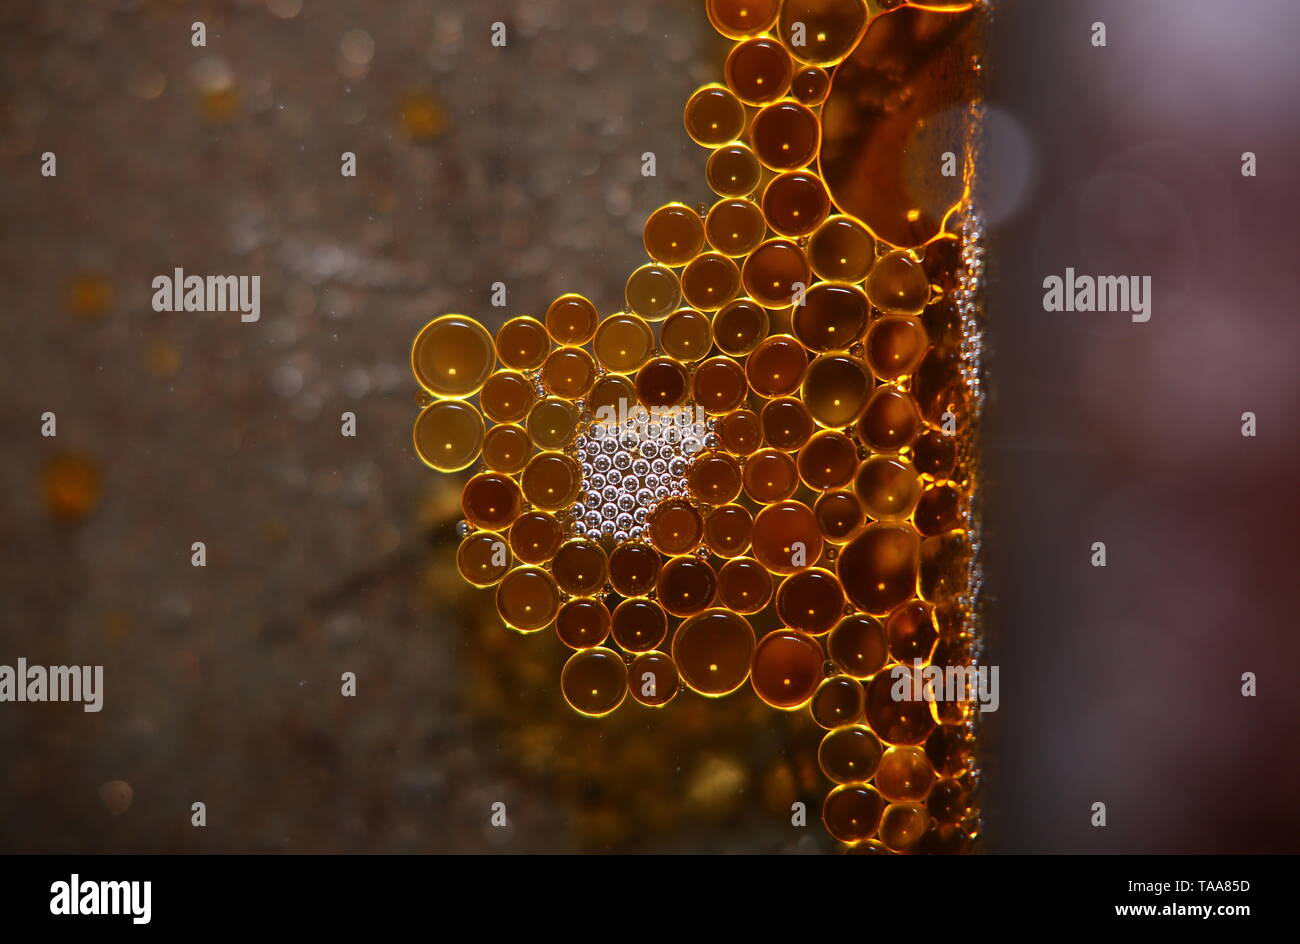 Drops of grease in a regular pattern. Stock Photo